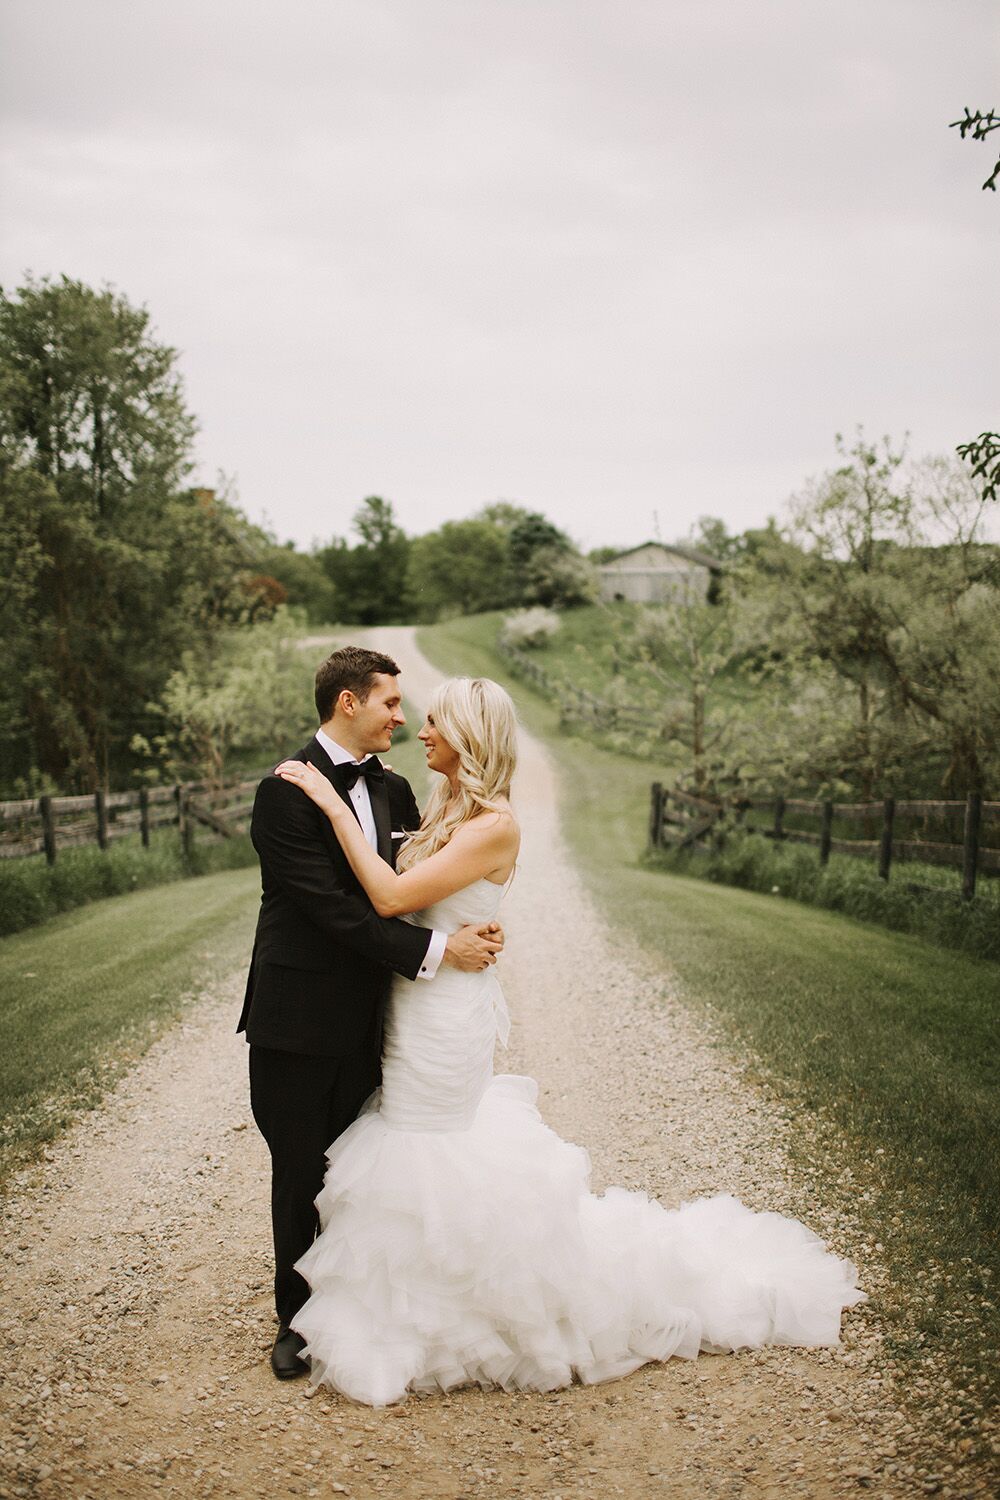 An Elegant Rustic Wedding  at Snow Avenue Greenhouse in 